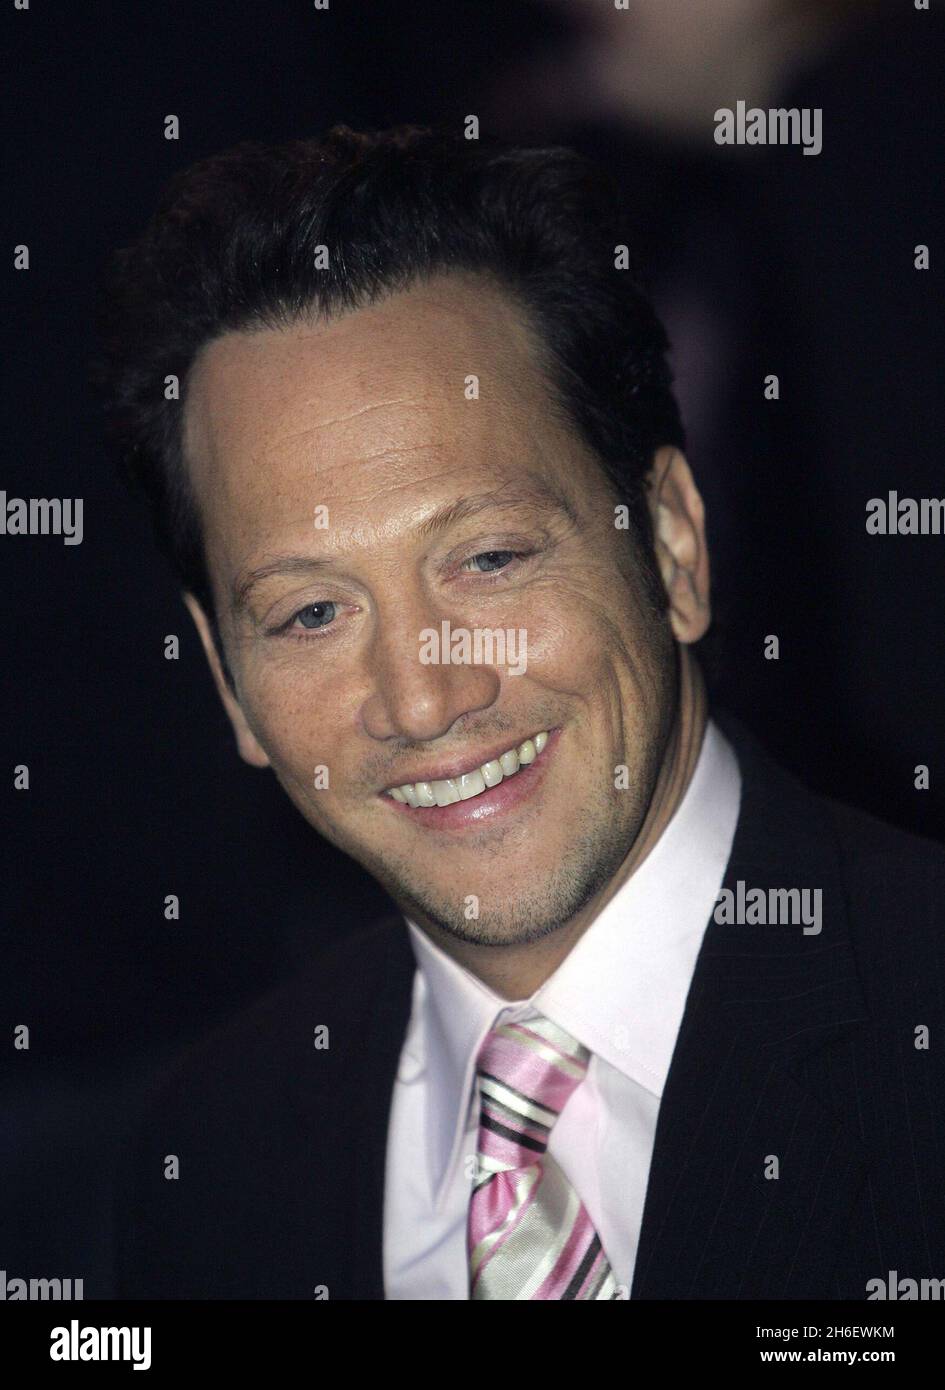 Rob Schneider attends the Deuce Bigalow:European Gigola UK film premiere in central London on 26/09/05.     Stock Photo